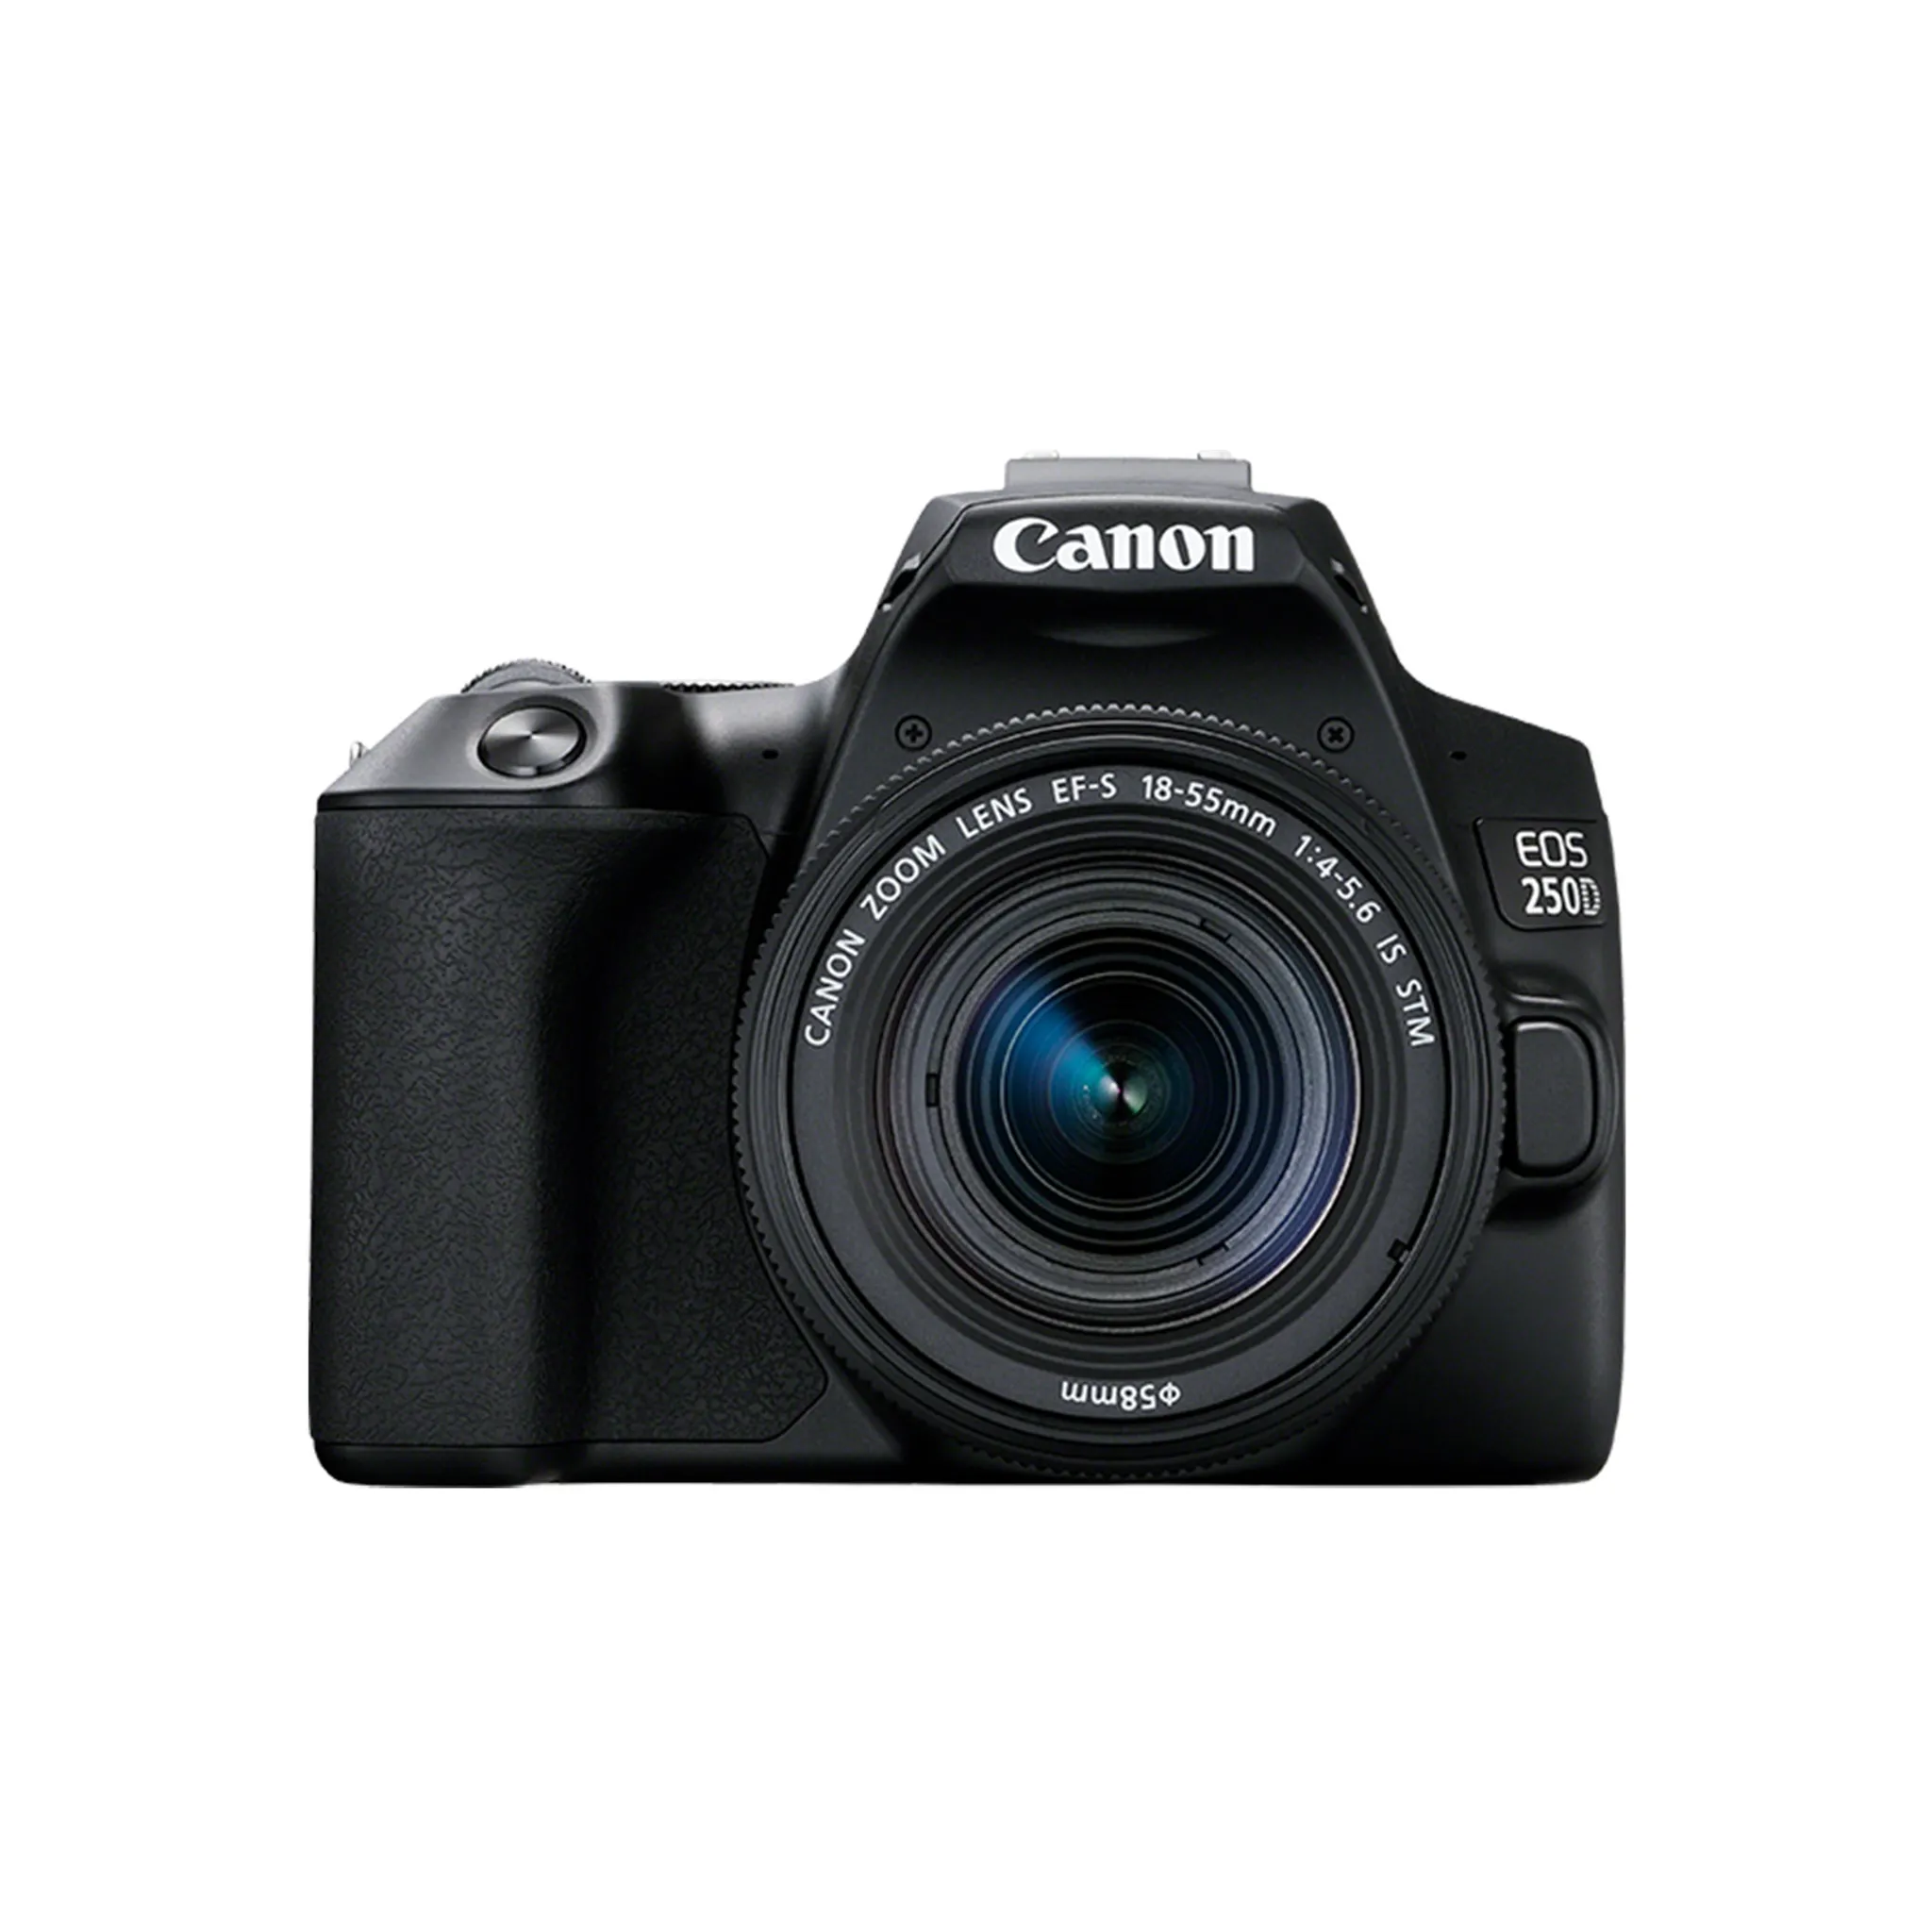 Canon EOS 250D IS 18-55mm + EF-S f/4-5.6 STM